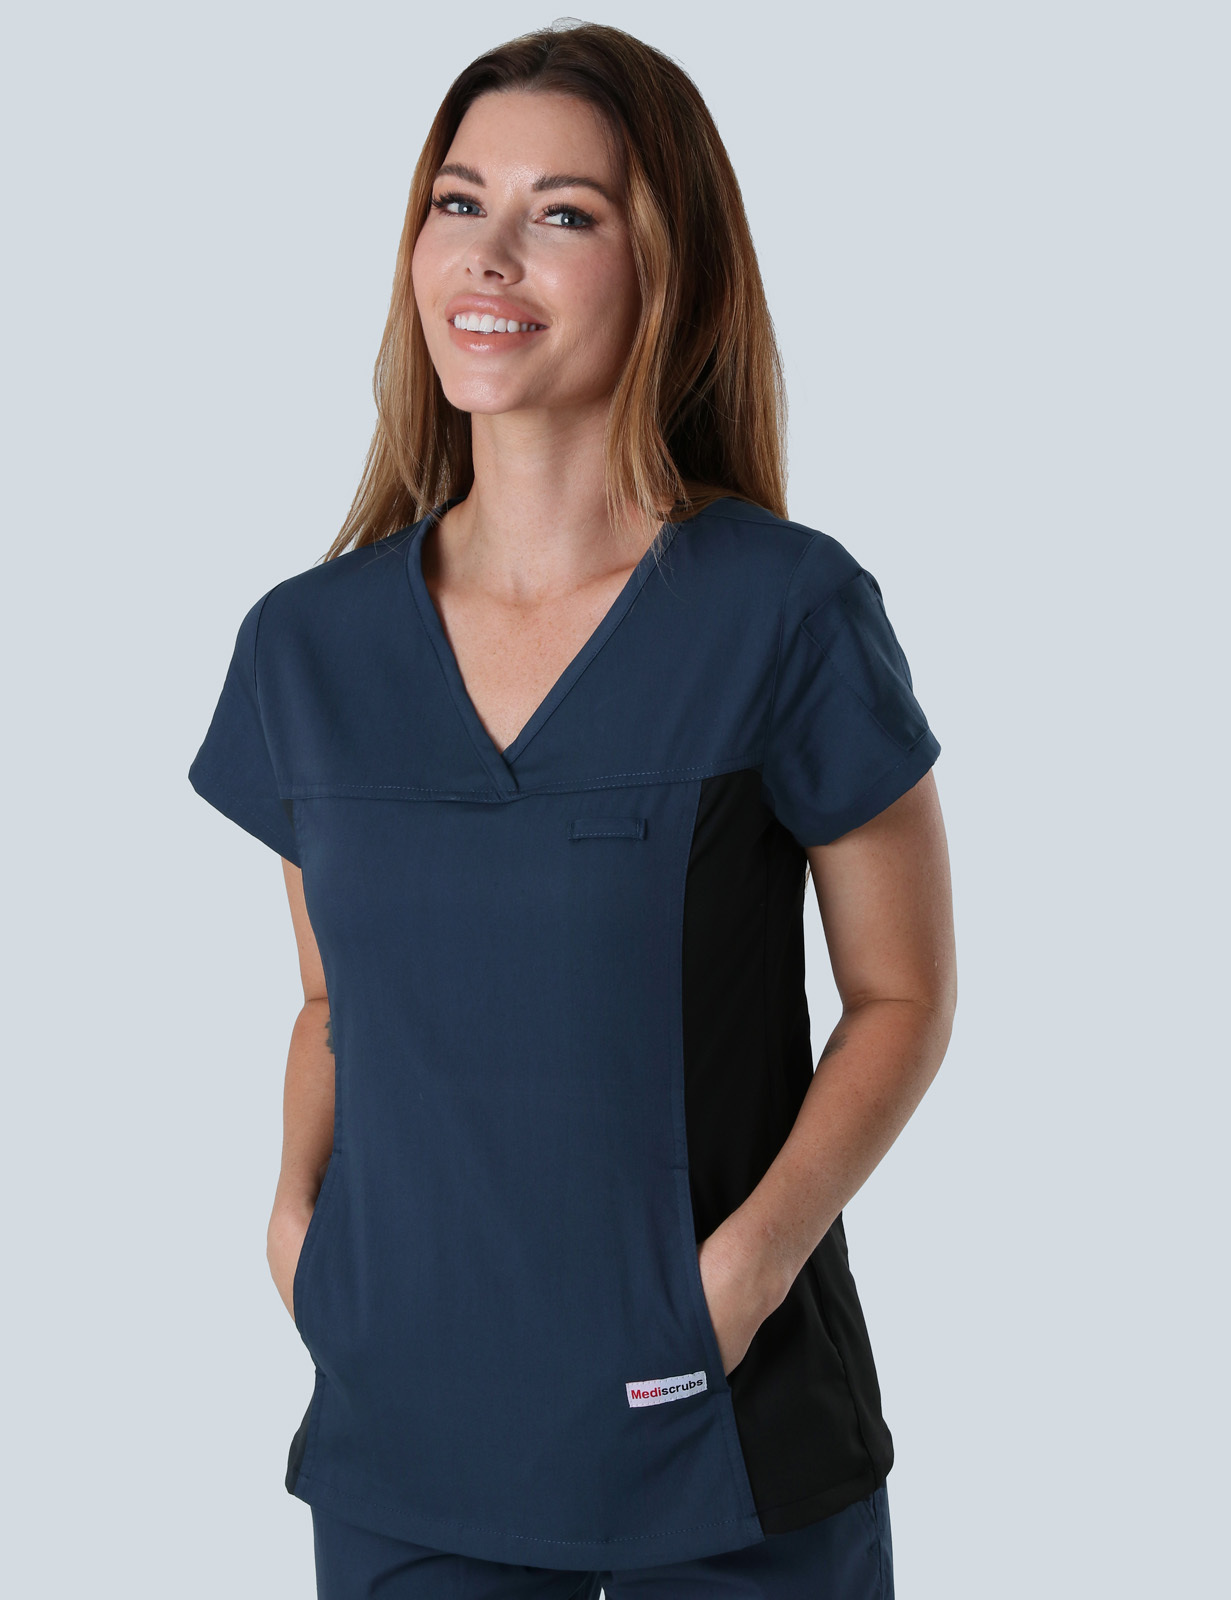 Pathology North - Coffs Harbour (Women's Fit Spandex Scrub Top in Navy incl Logos)